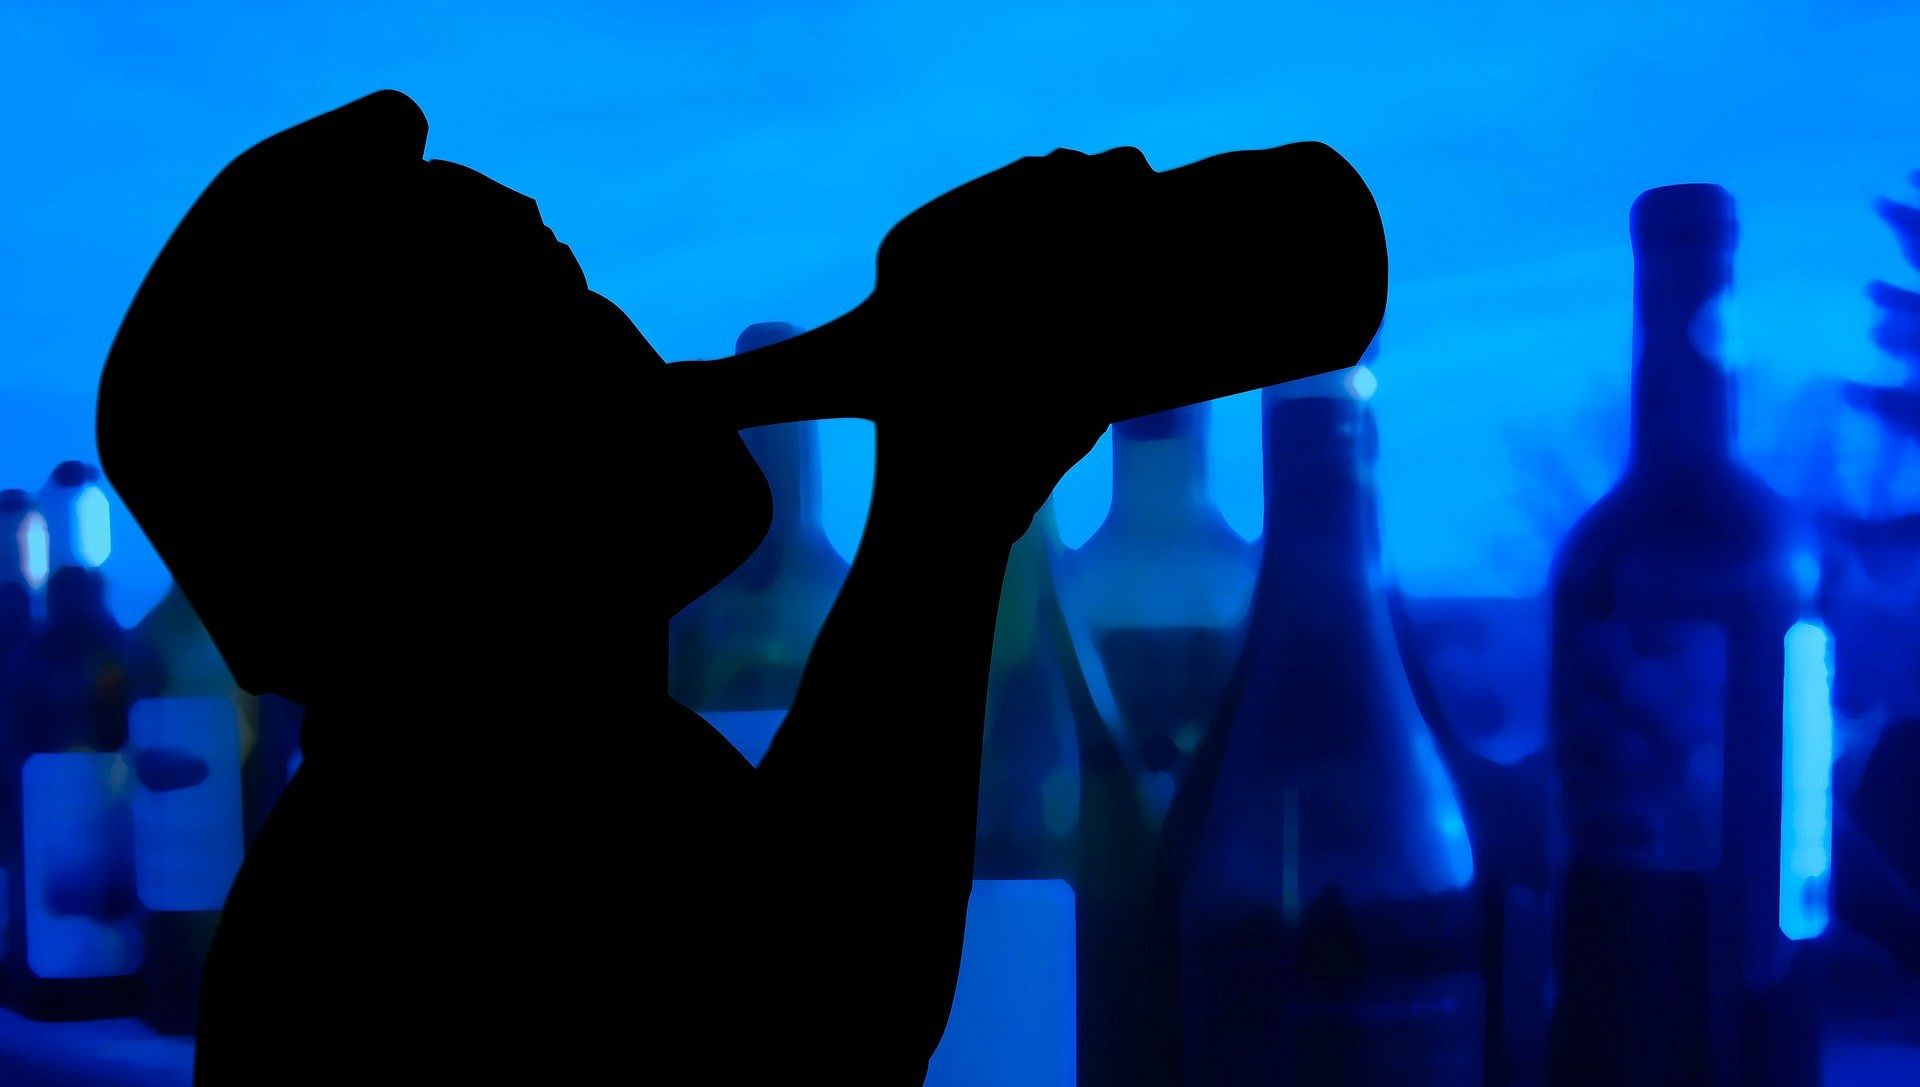 Sachin Kalshetti, MLA from Akkalkot, said that some people, who seemed to be under the influence of alcohol, knocked on his door on Tuesday night, and demanded Rs 500 from him. Representative image/Pixabay